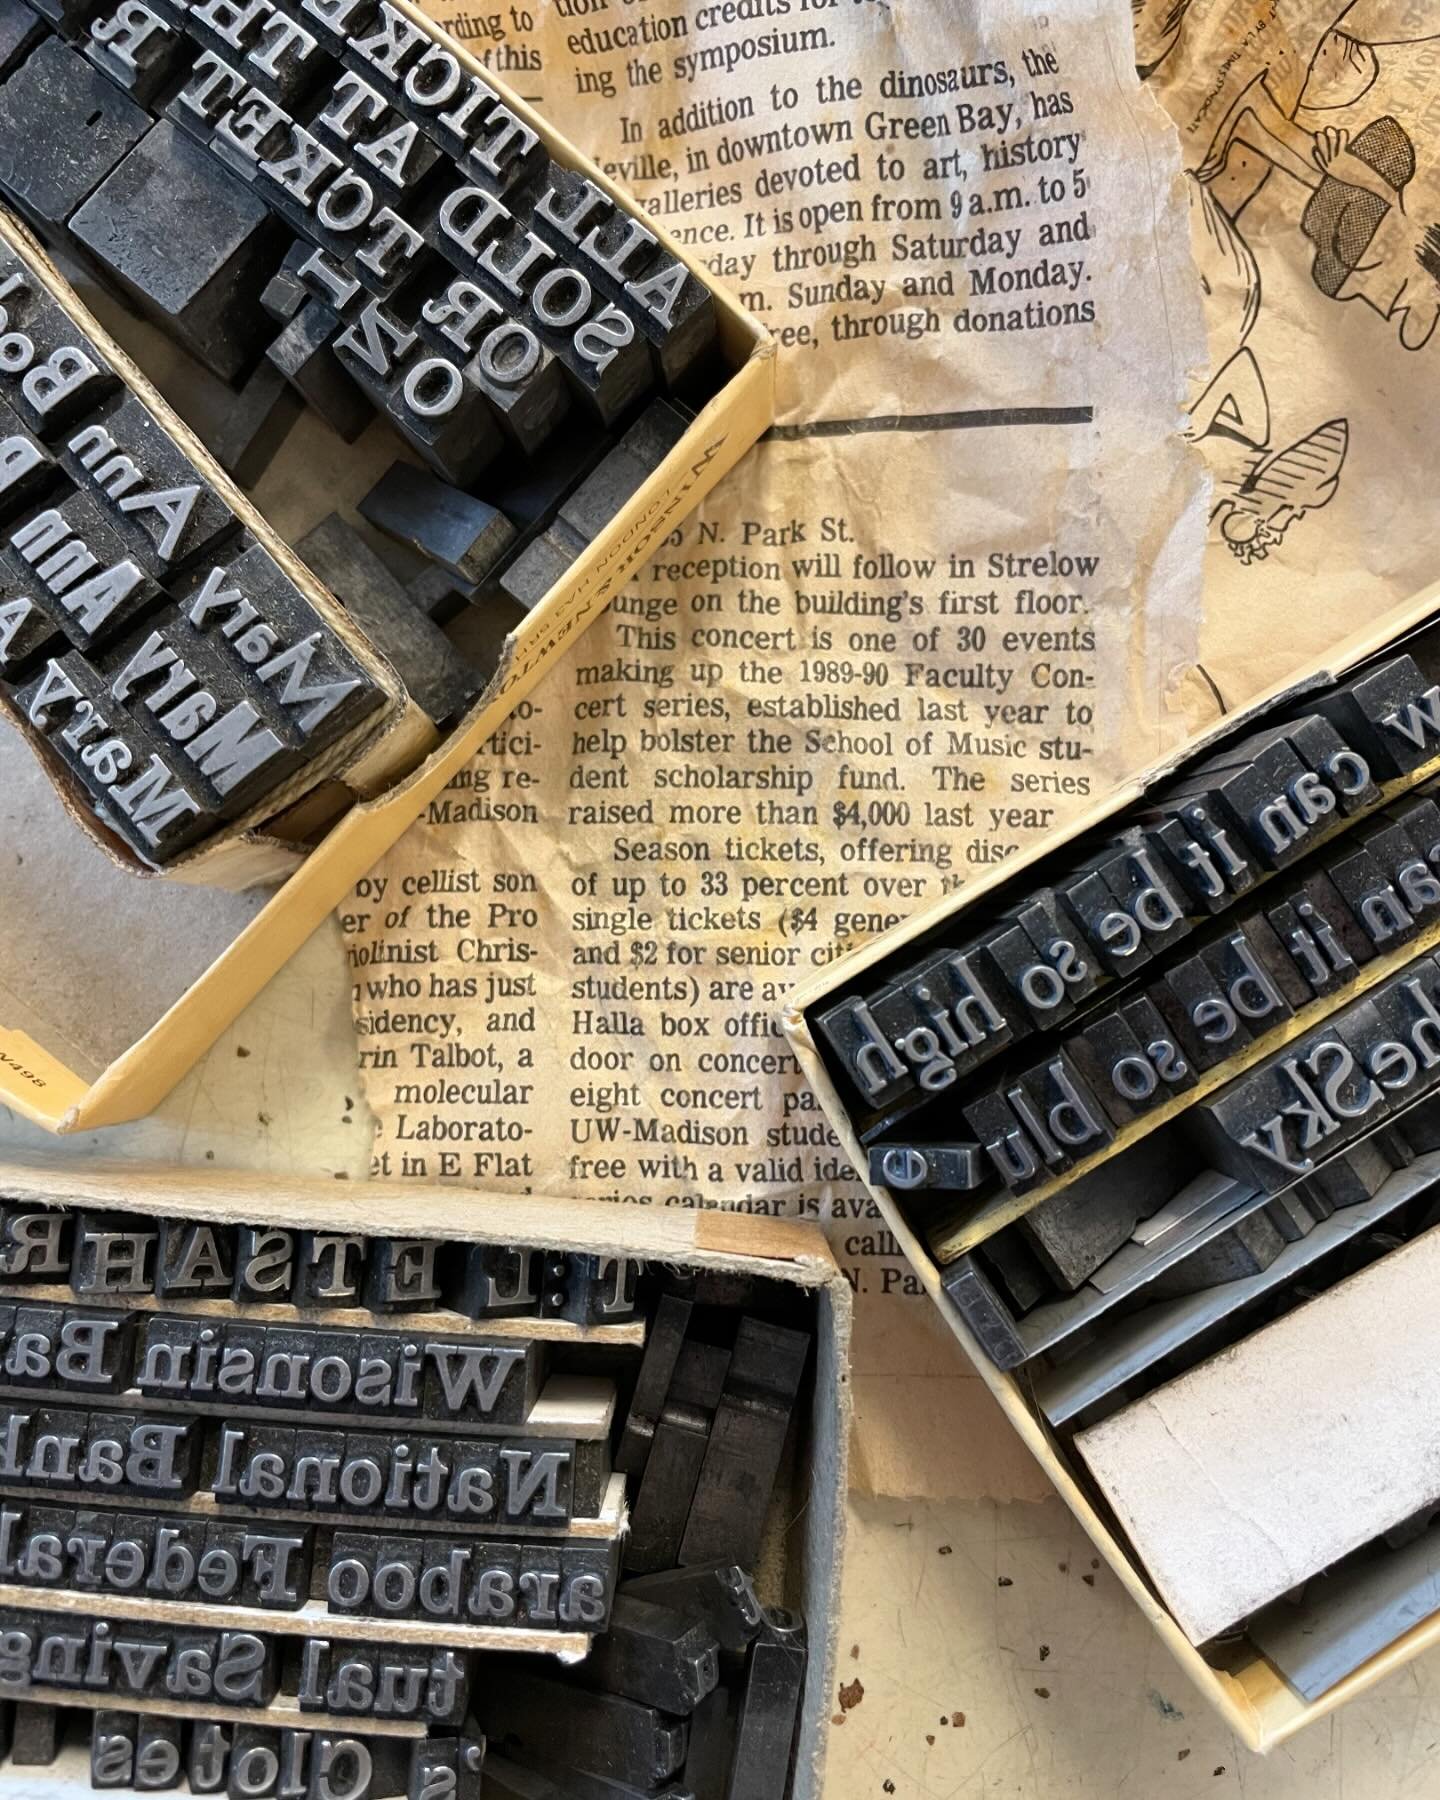 We picked up some type at an estate sale last week. We were told the items in the sale had been gathering dust for 30+ years. A yellowed piece of newspaper waded up with the type confirms it&hellip; 1989 was around the last time this was in use. It w